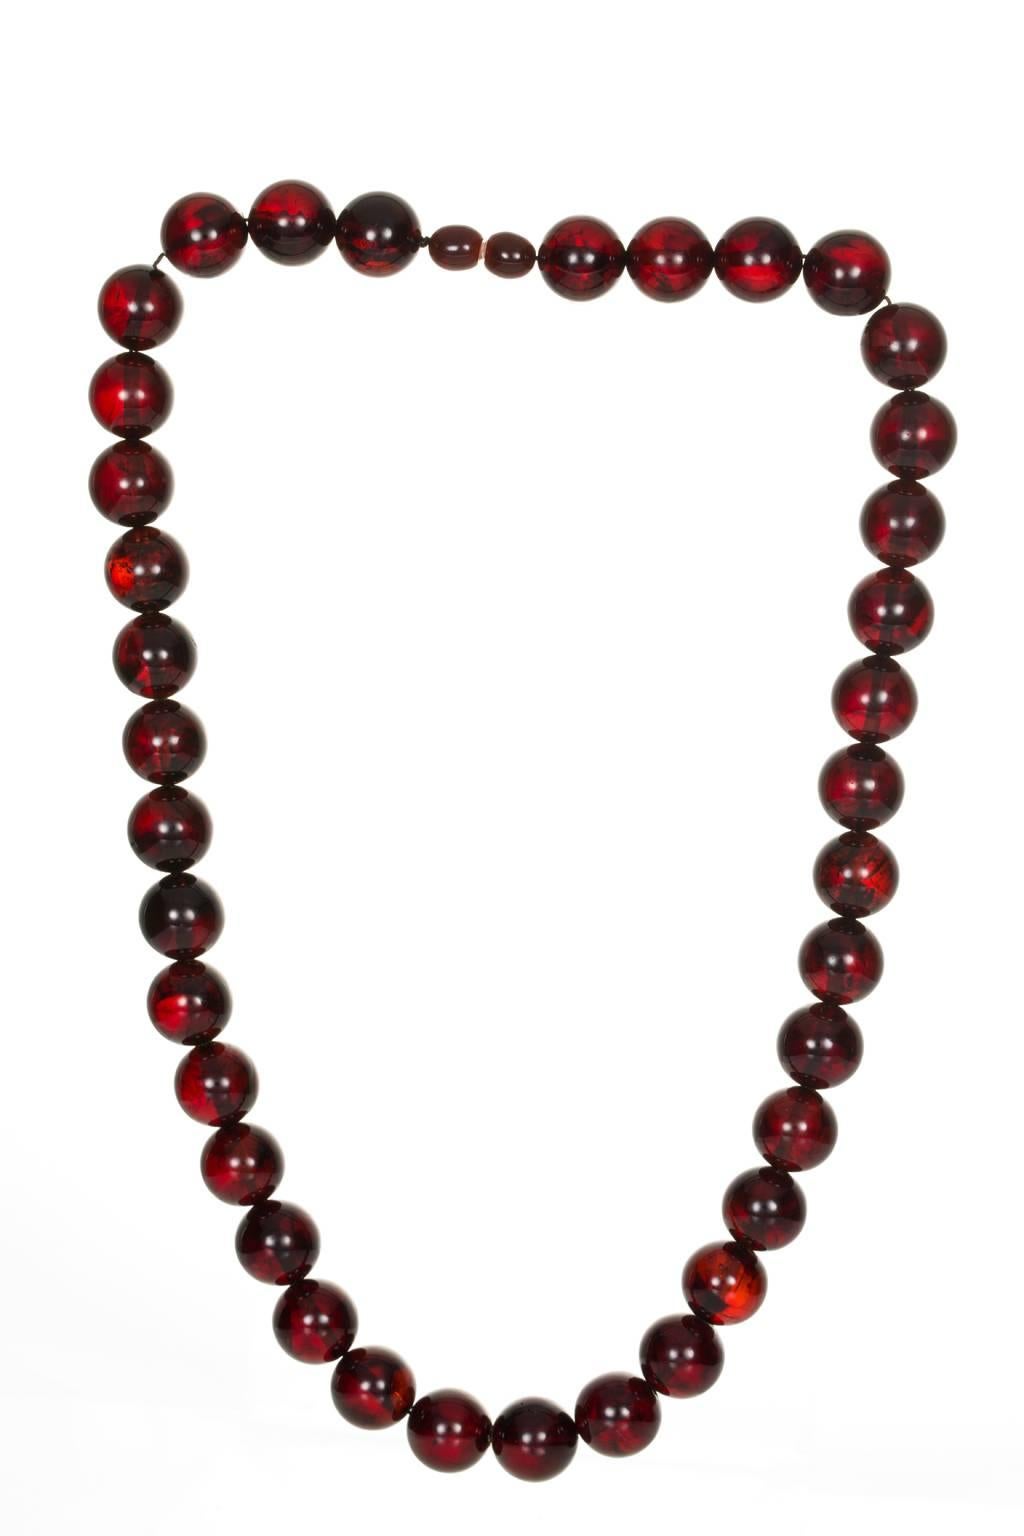 Deep rich tones of dark cherry red and golden brown, these 37 beads of amber make up the most gorgeous necklace. The beads are approximately 12mm in diameter and are fastened with a screw amber bead clasp. The necklace is 19 inches in length - 47 cm